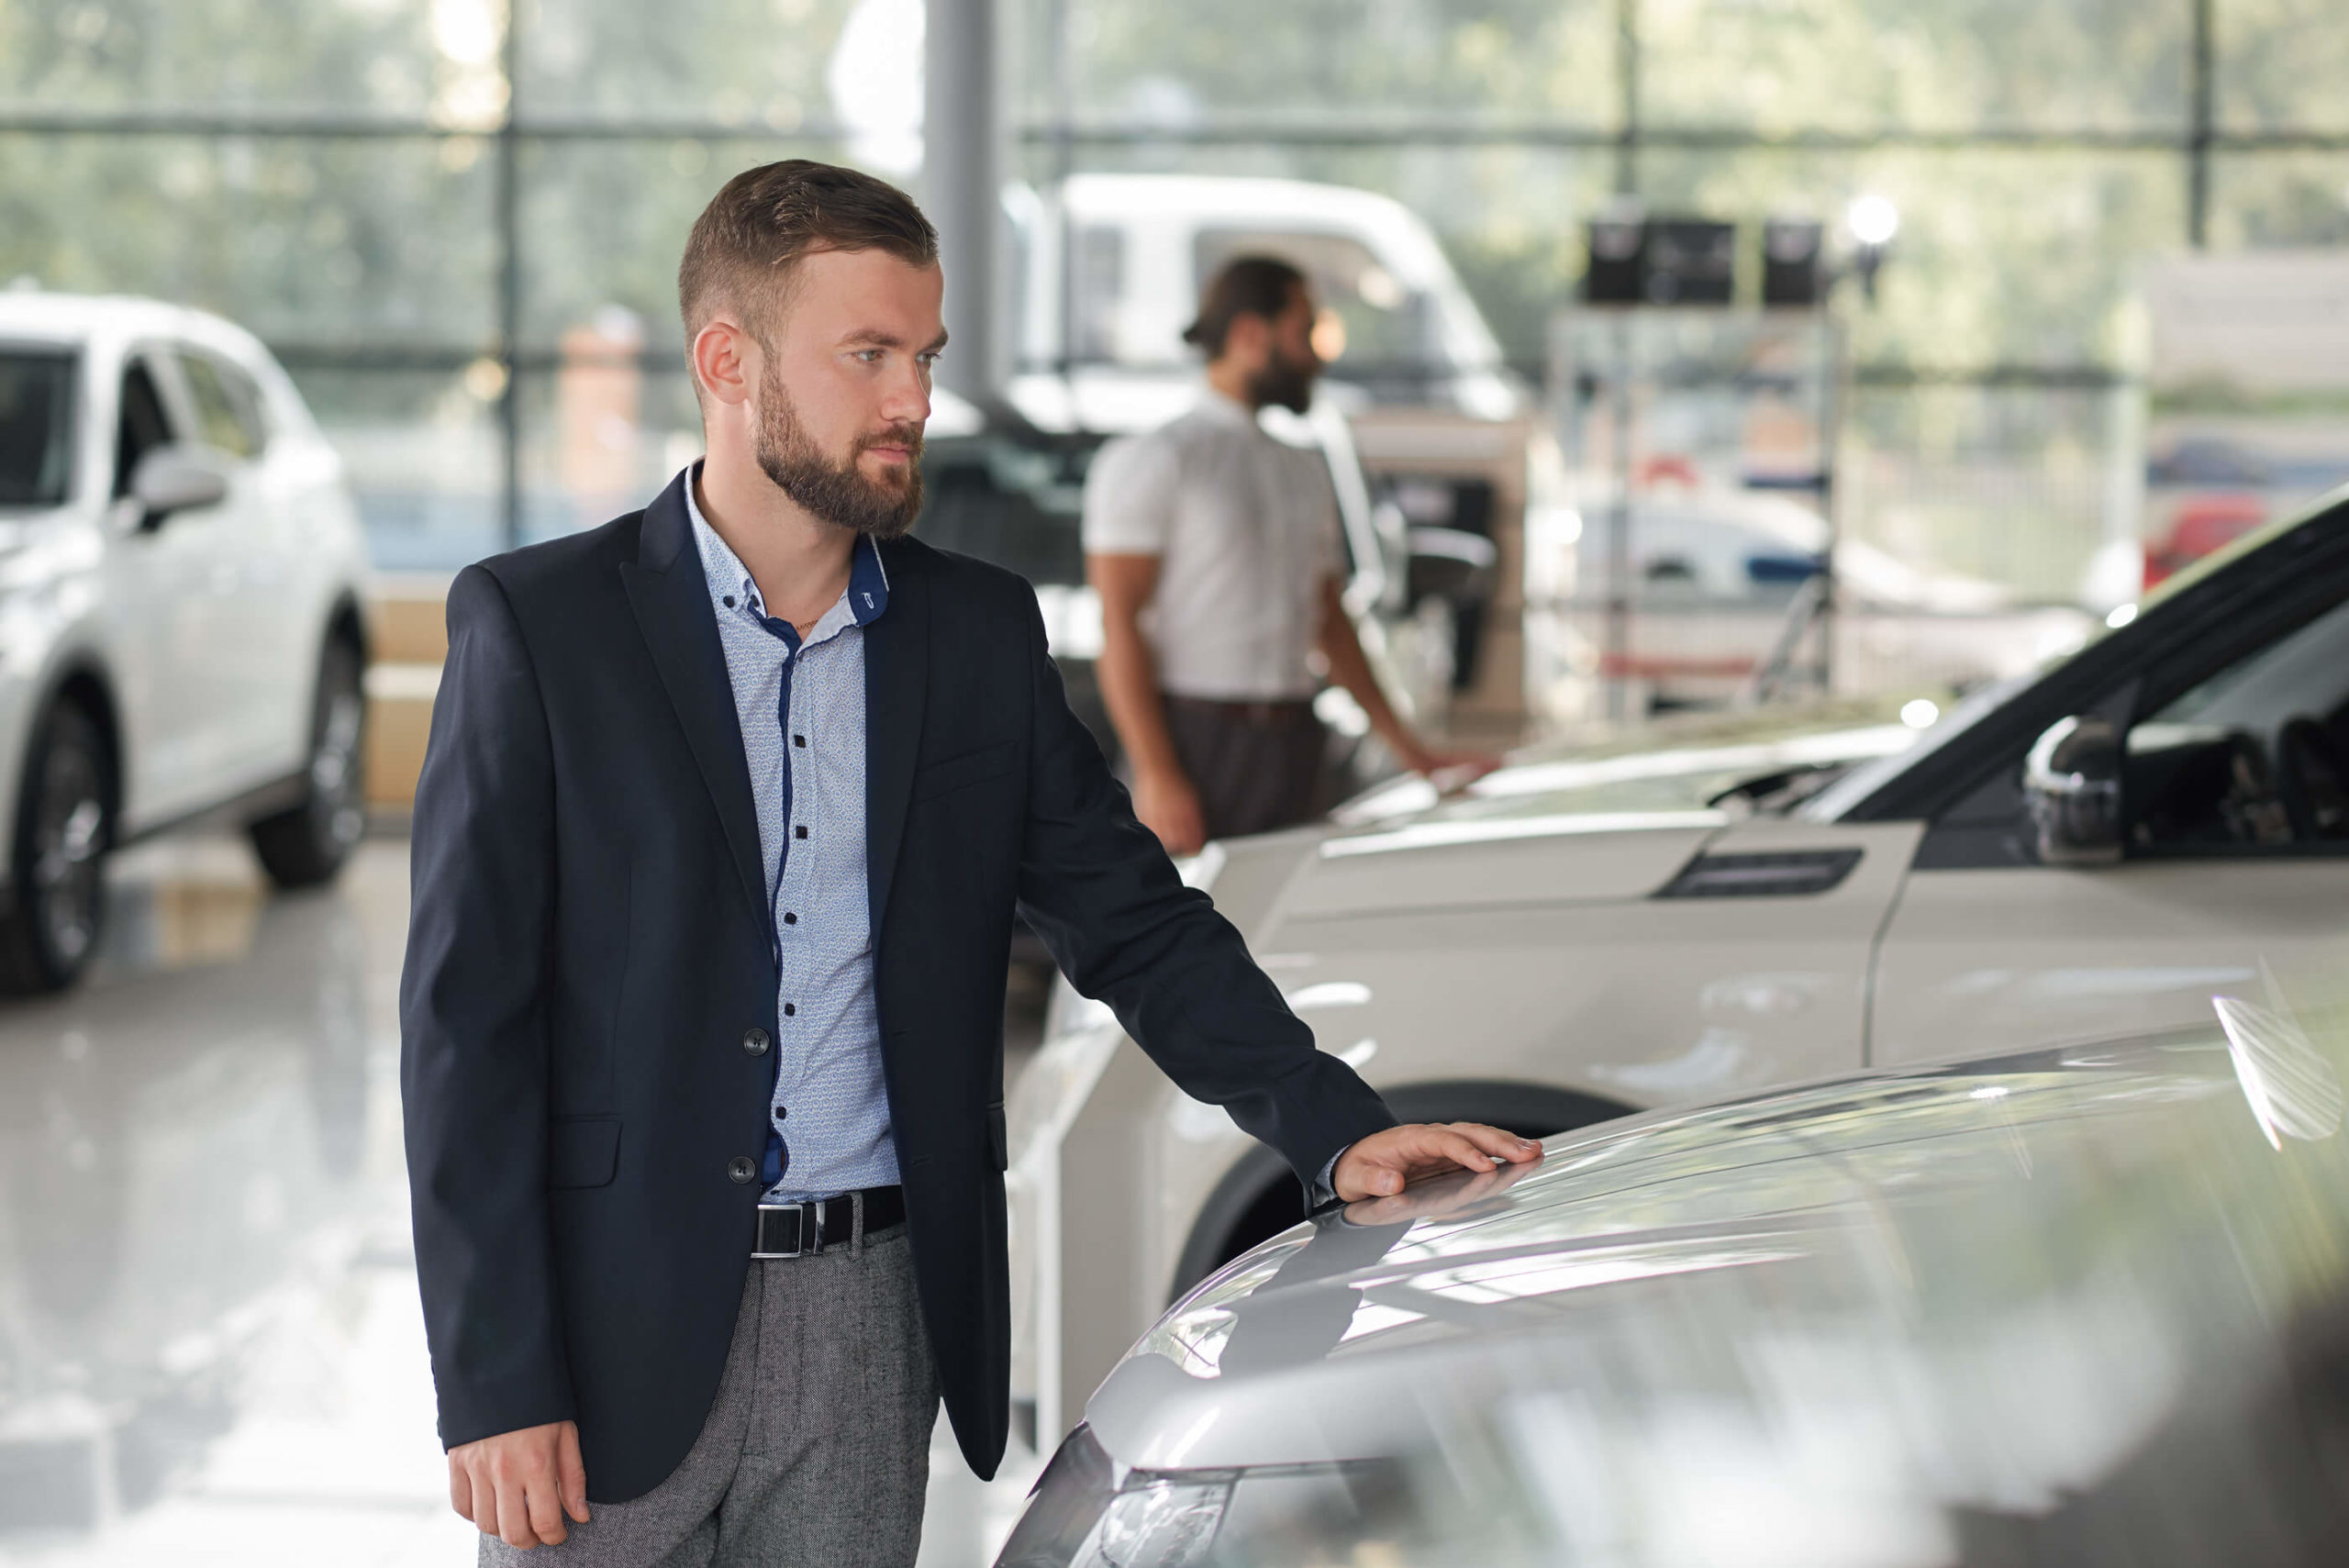 Men-Looking-For-Vehicles-To-Buy-In-Car-Dealership